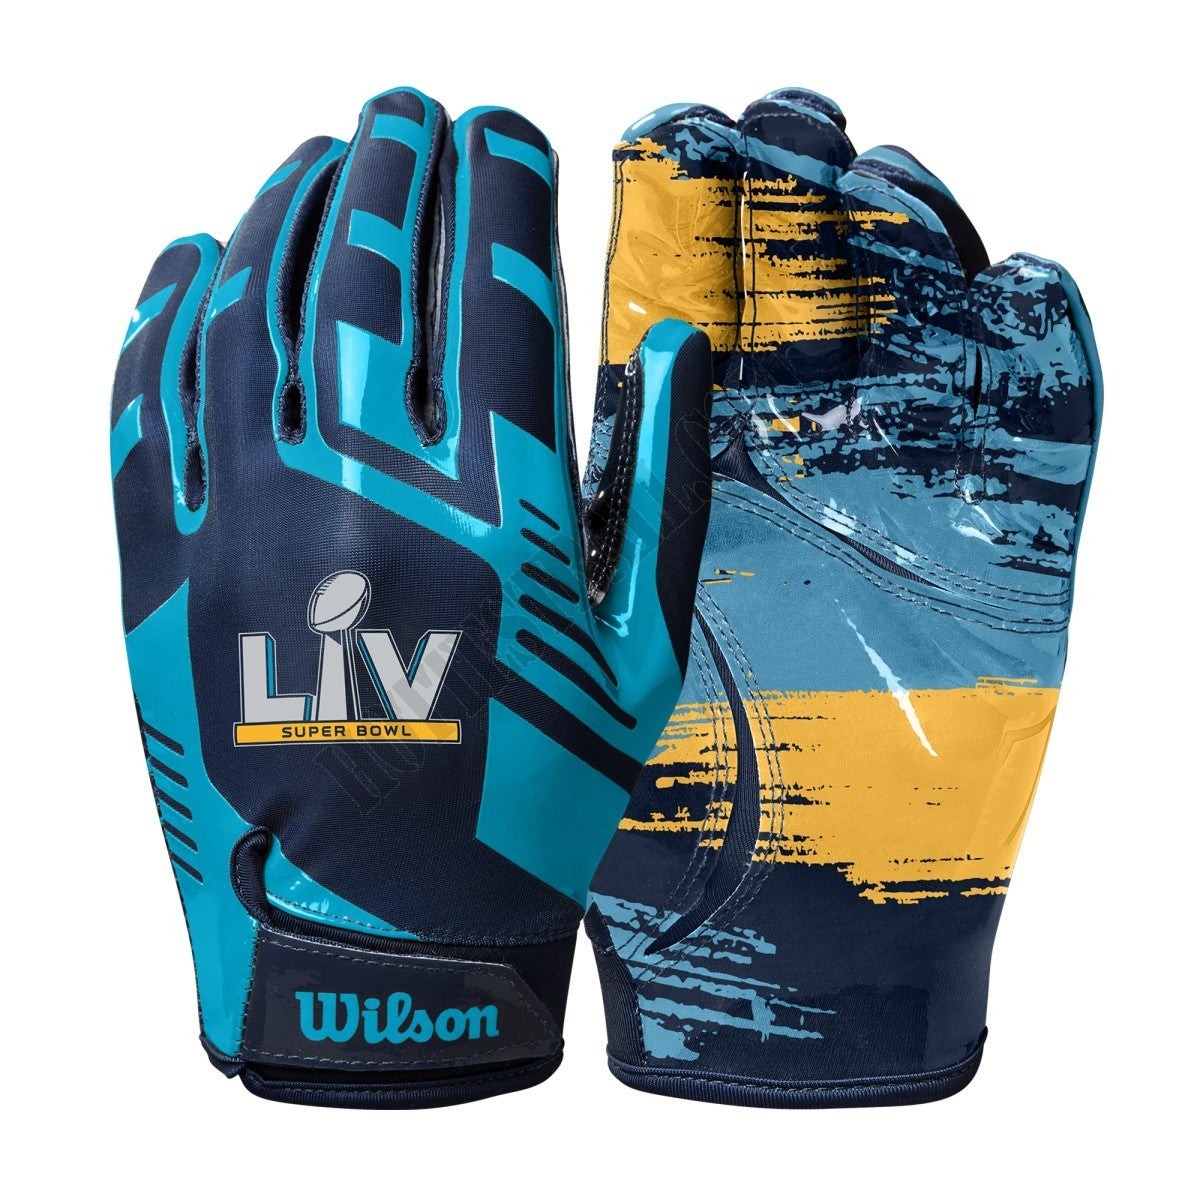 Super Bowl LV Stretch Fit Youth Receivers Gloves - Wilson Discount Store - Super Bowl LV Stretch Fit Youth Receivers Gloves - Wilson Discount Store